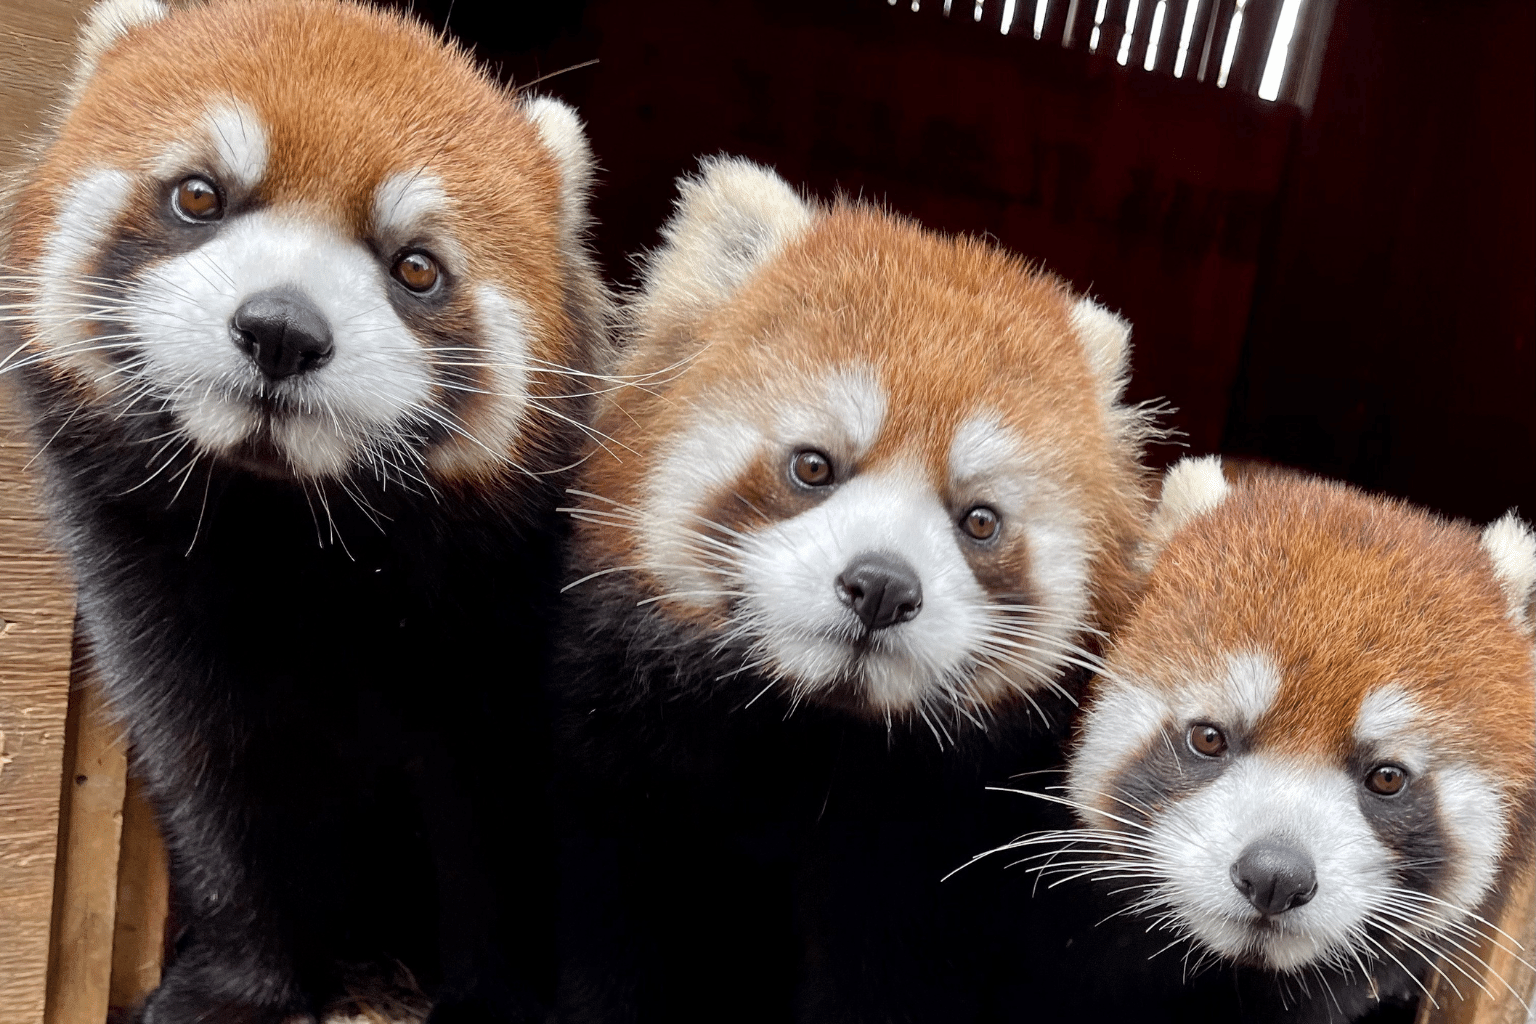 Red Panda Representation In The Media: A Different Kind of Conservation